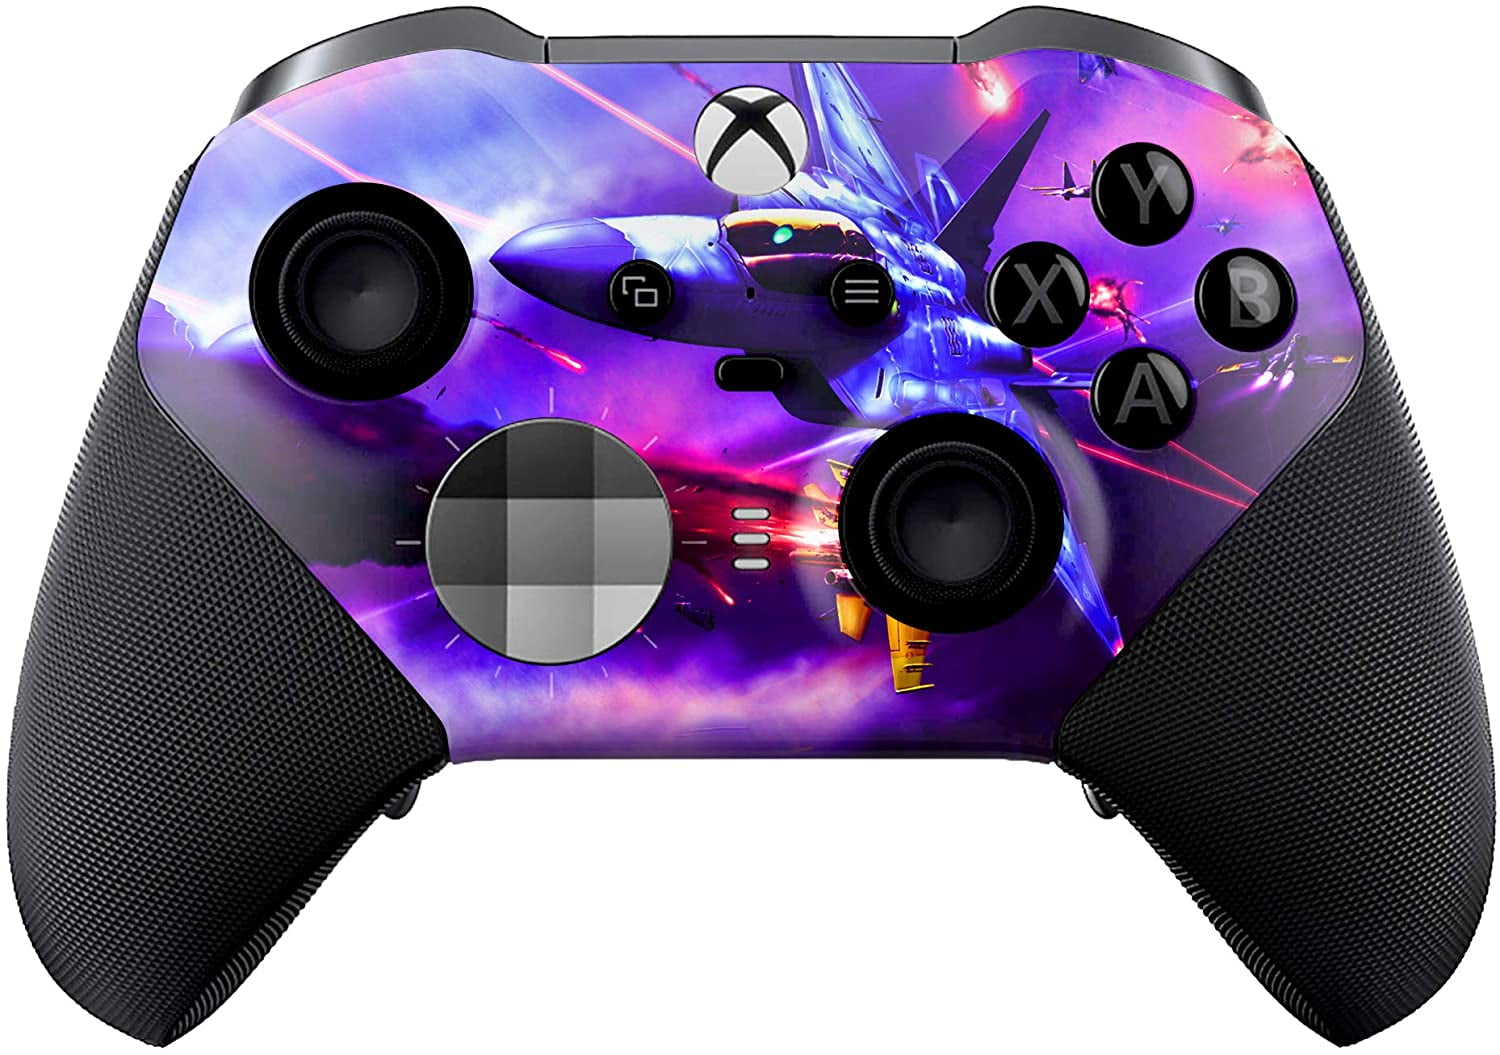  Custom Controllerzz Elite Series 2 Controller Compatible With  Xbox One, Xbox Series S and Xbox Series X (Purple Magma) : Video Games